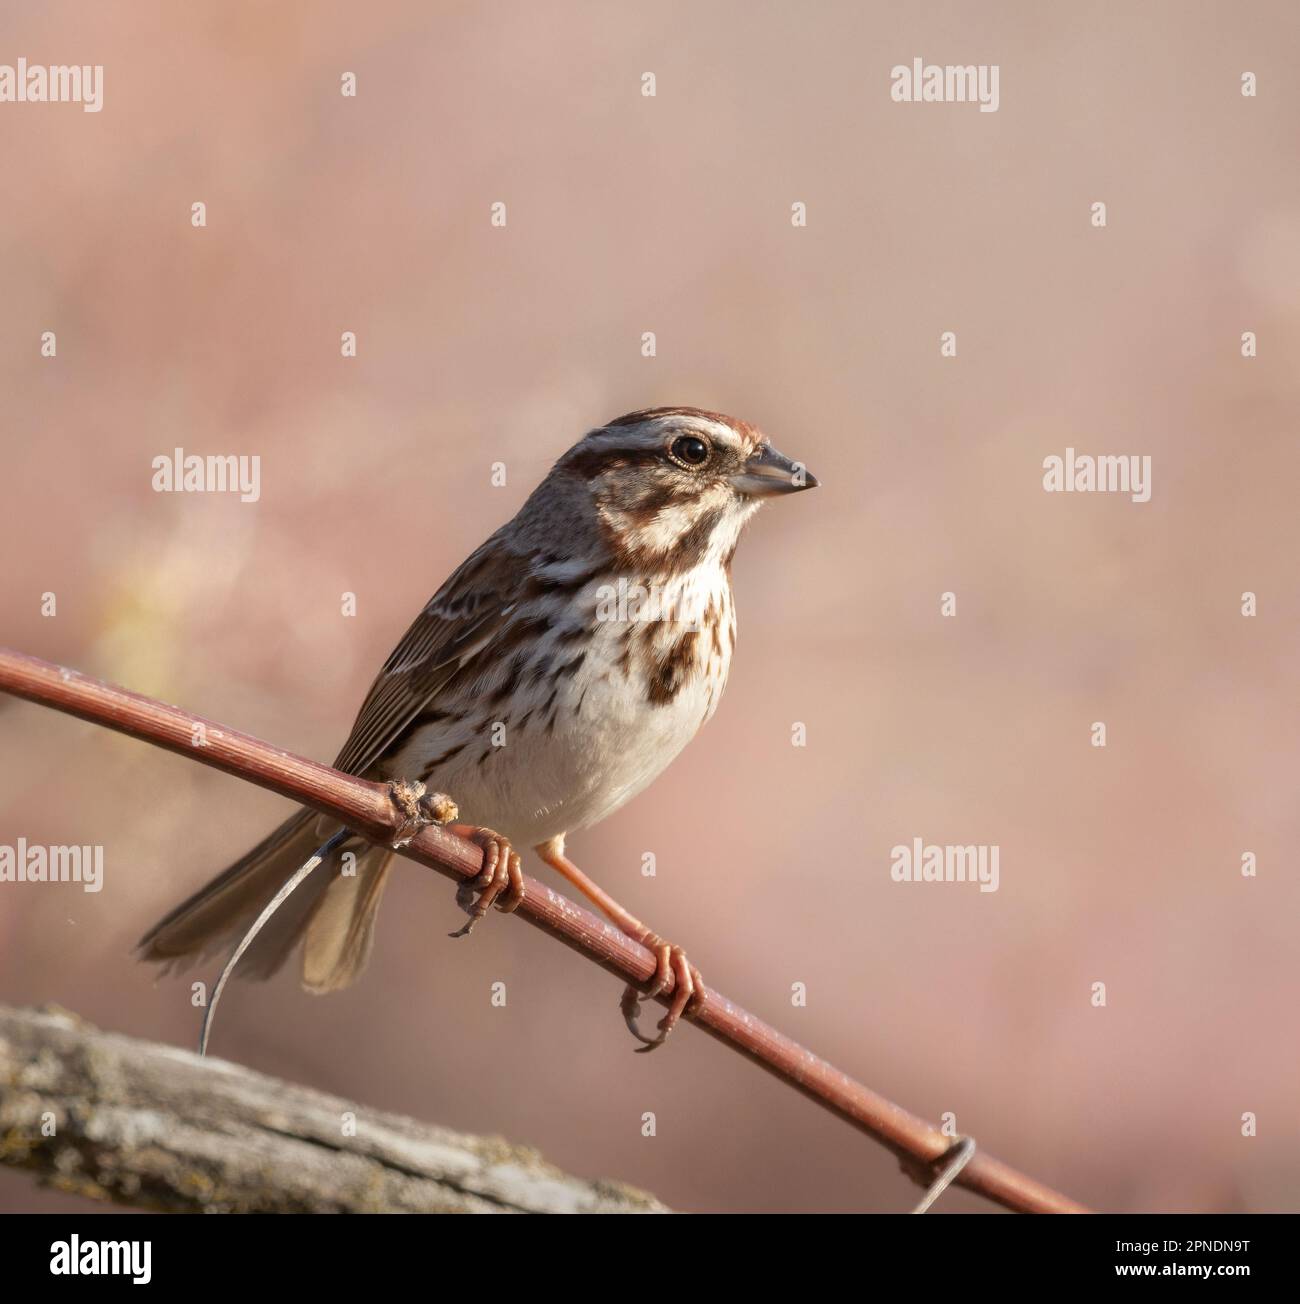 A small song sparrow on a branch with rose coloured marsh background in morning light in springtime Stock Photo